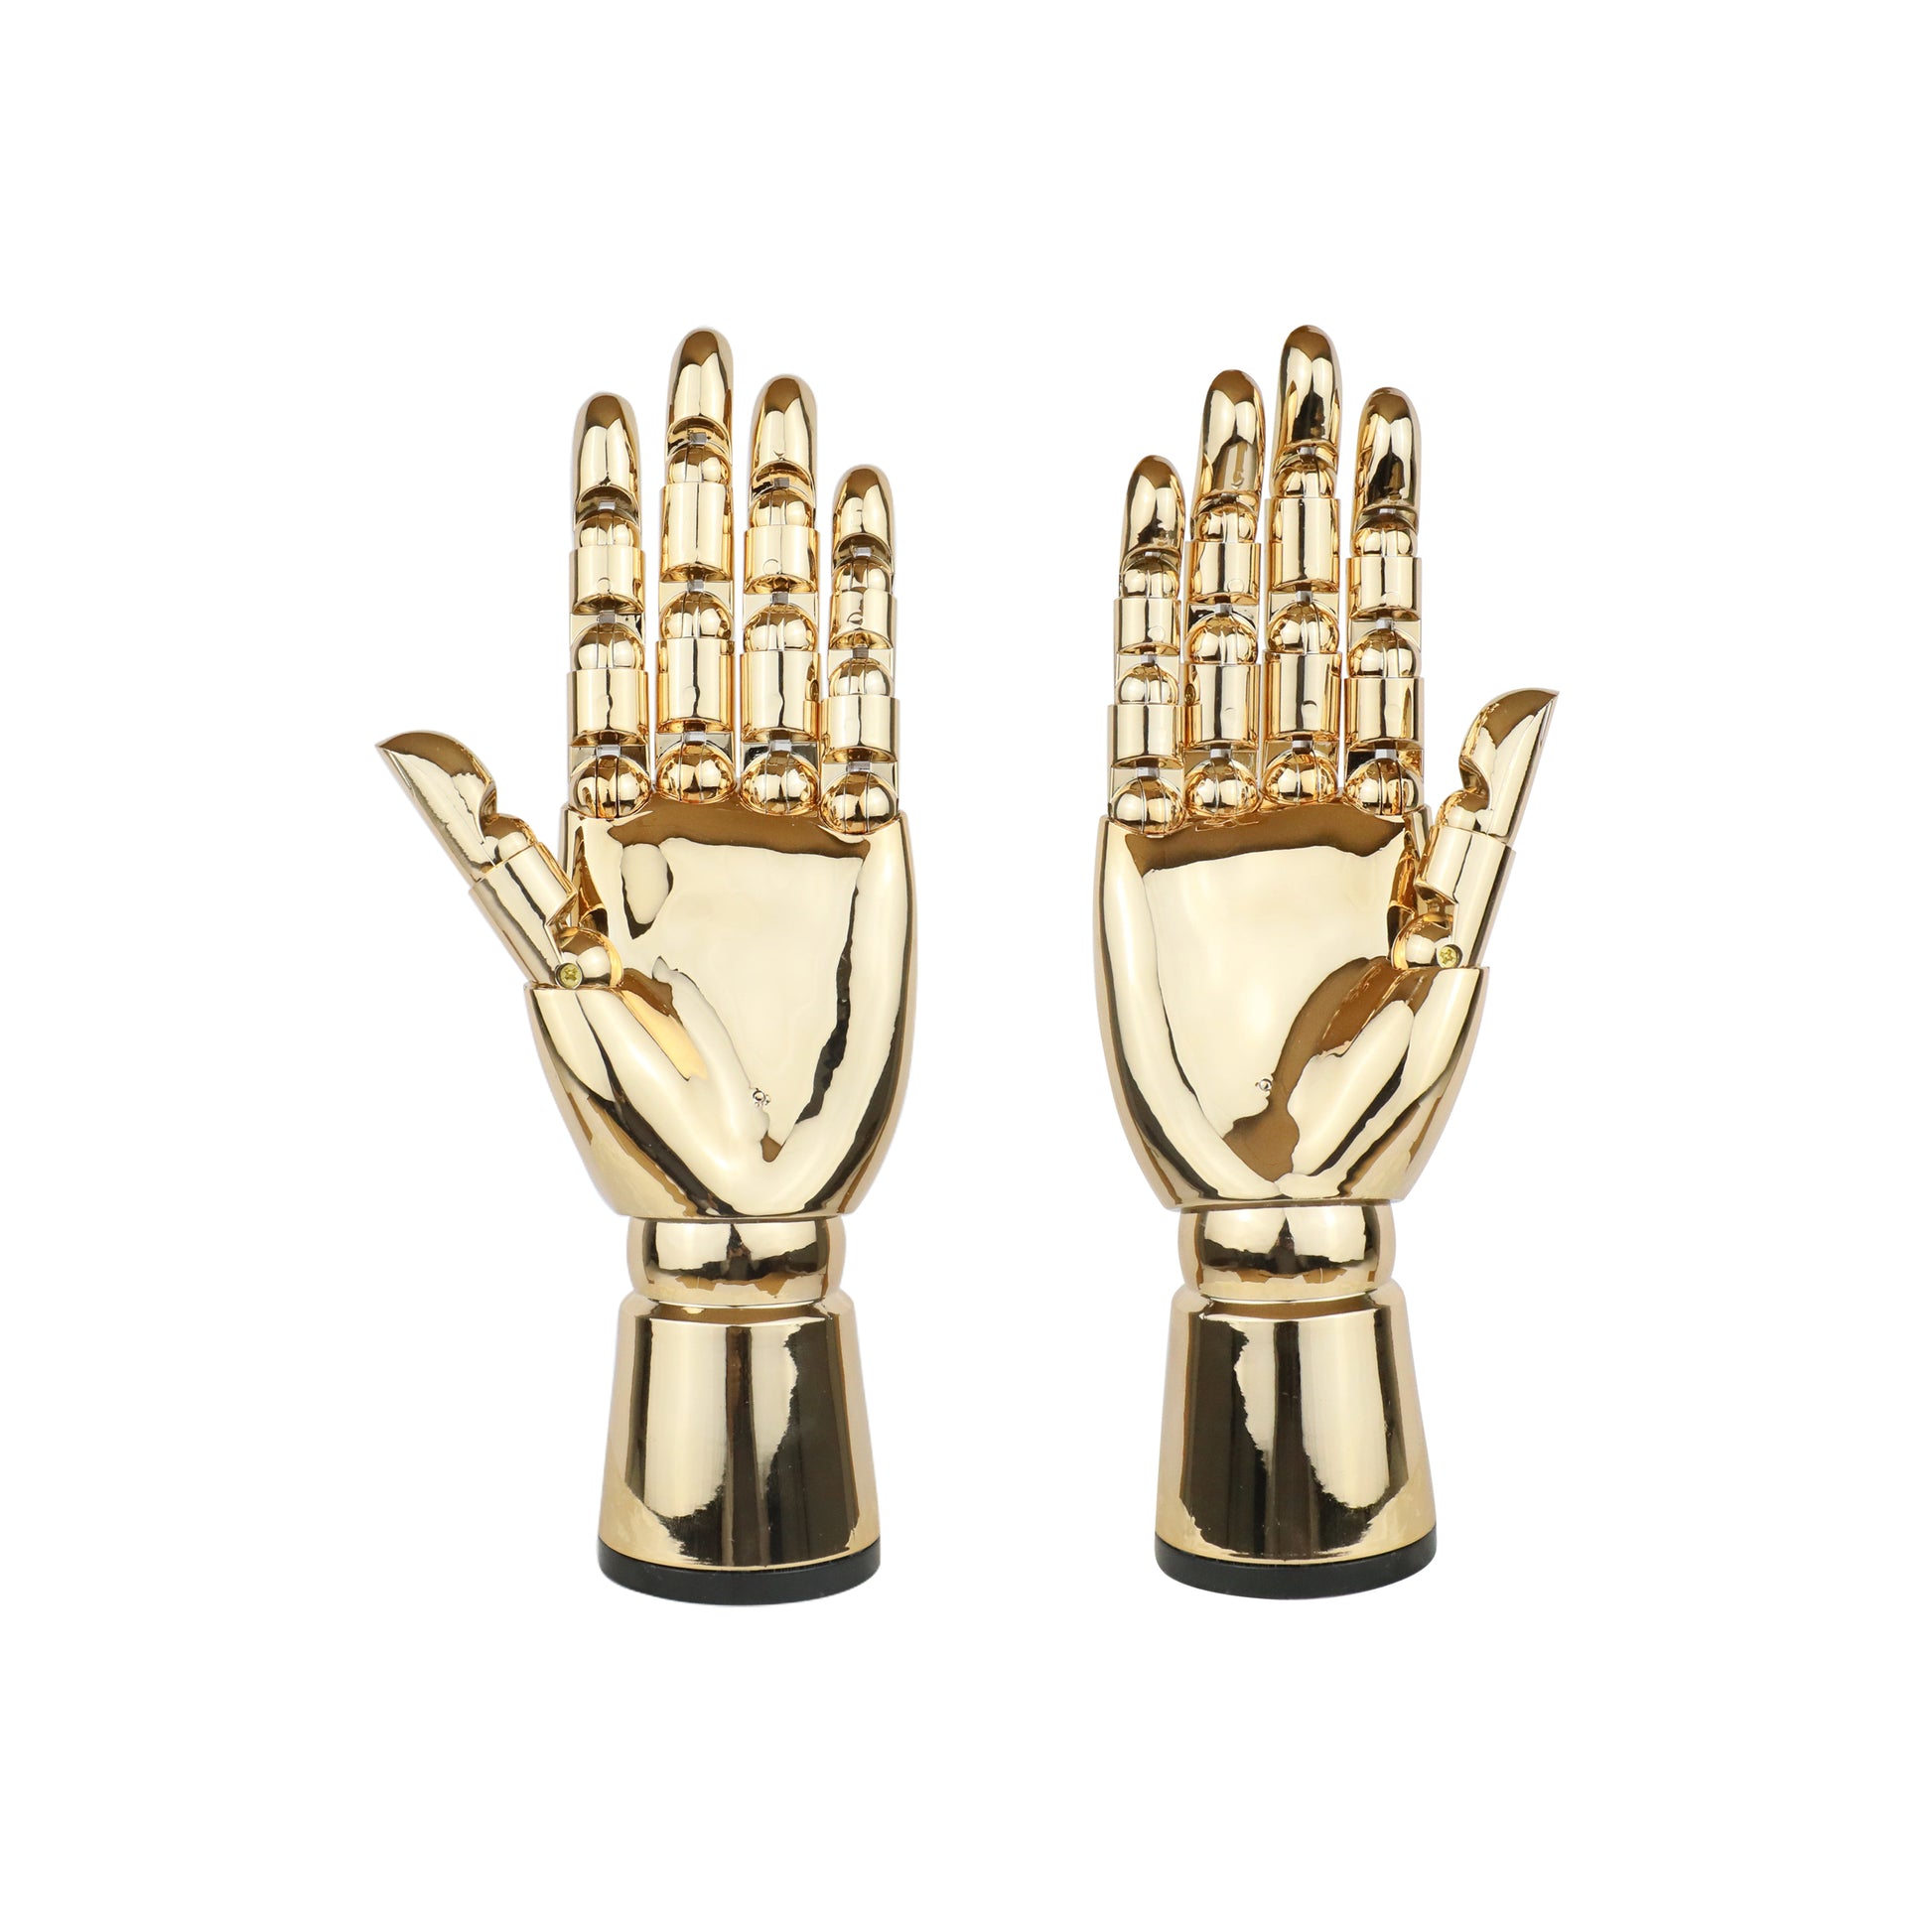 Fashion Electroplating Female Hand Mannequin,Plated Golden Left and Right Hand Model Props,Movable Joint Simulation Jewelry,Bracelet Display DE-LIANG